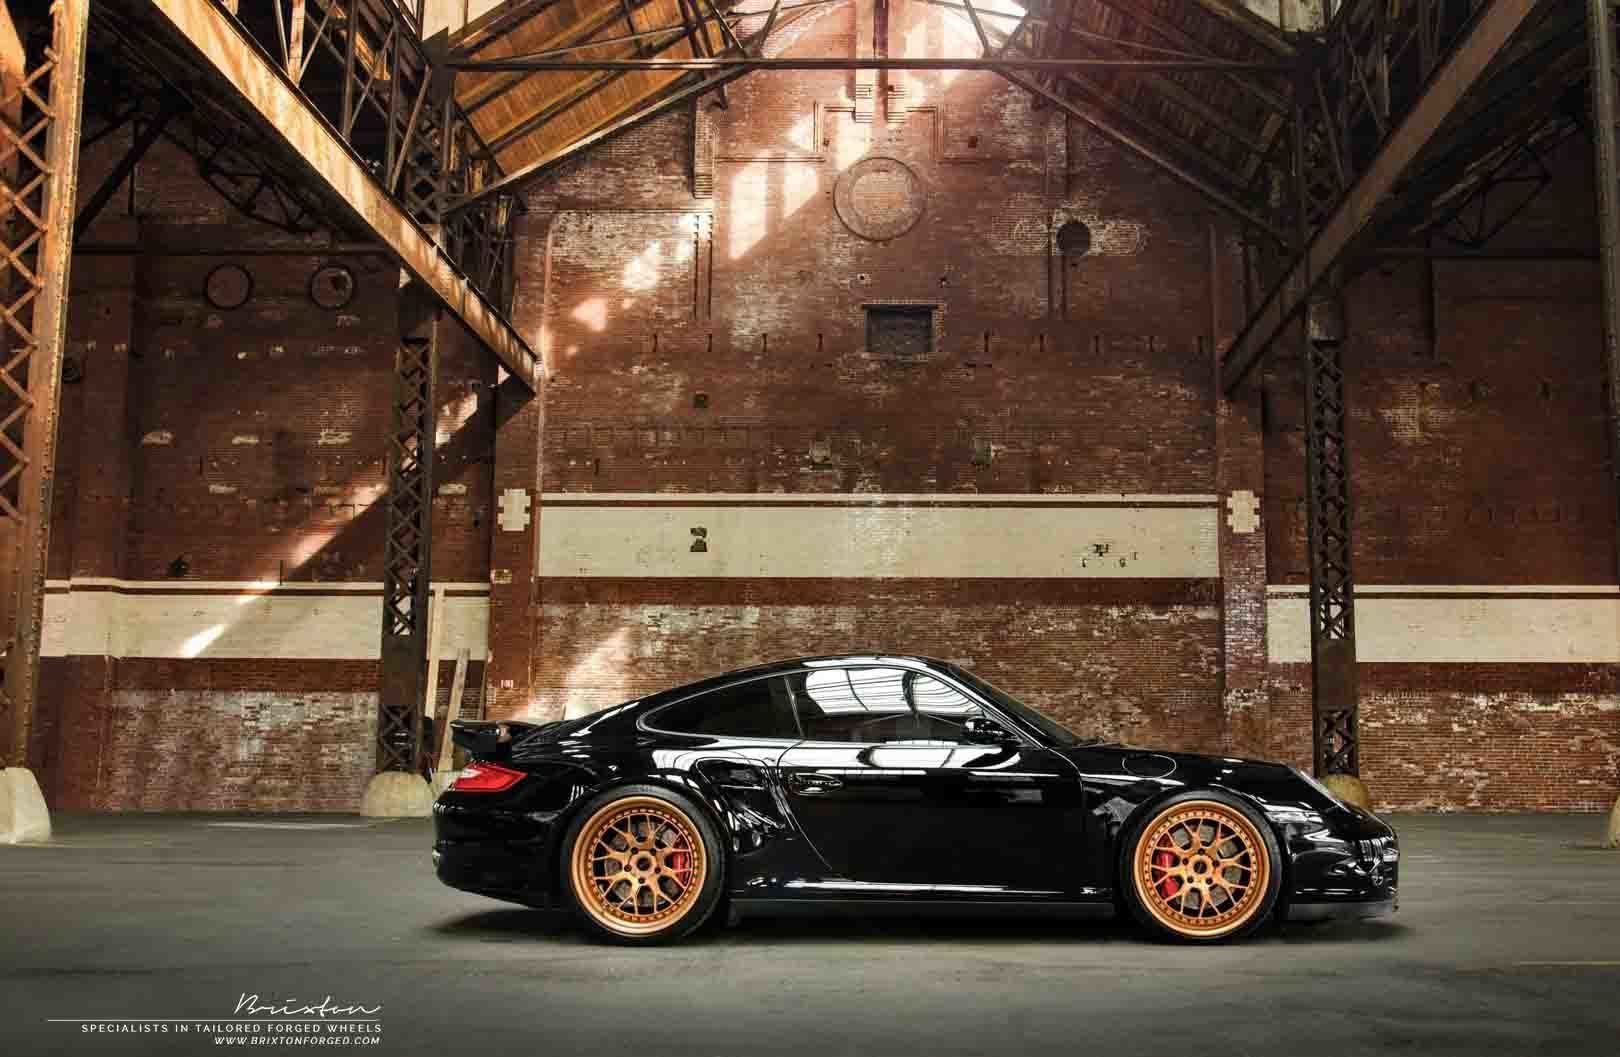 images-products-1-2705-232974993-black-porsche-997-turbo-brixton-forged-cm16-circuit-series-rose-gold-1800x1057.jpg